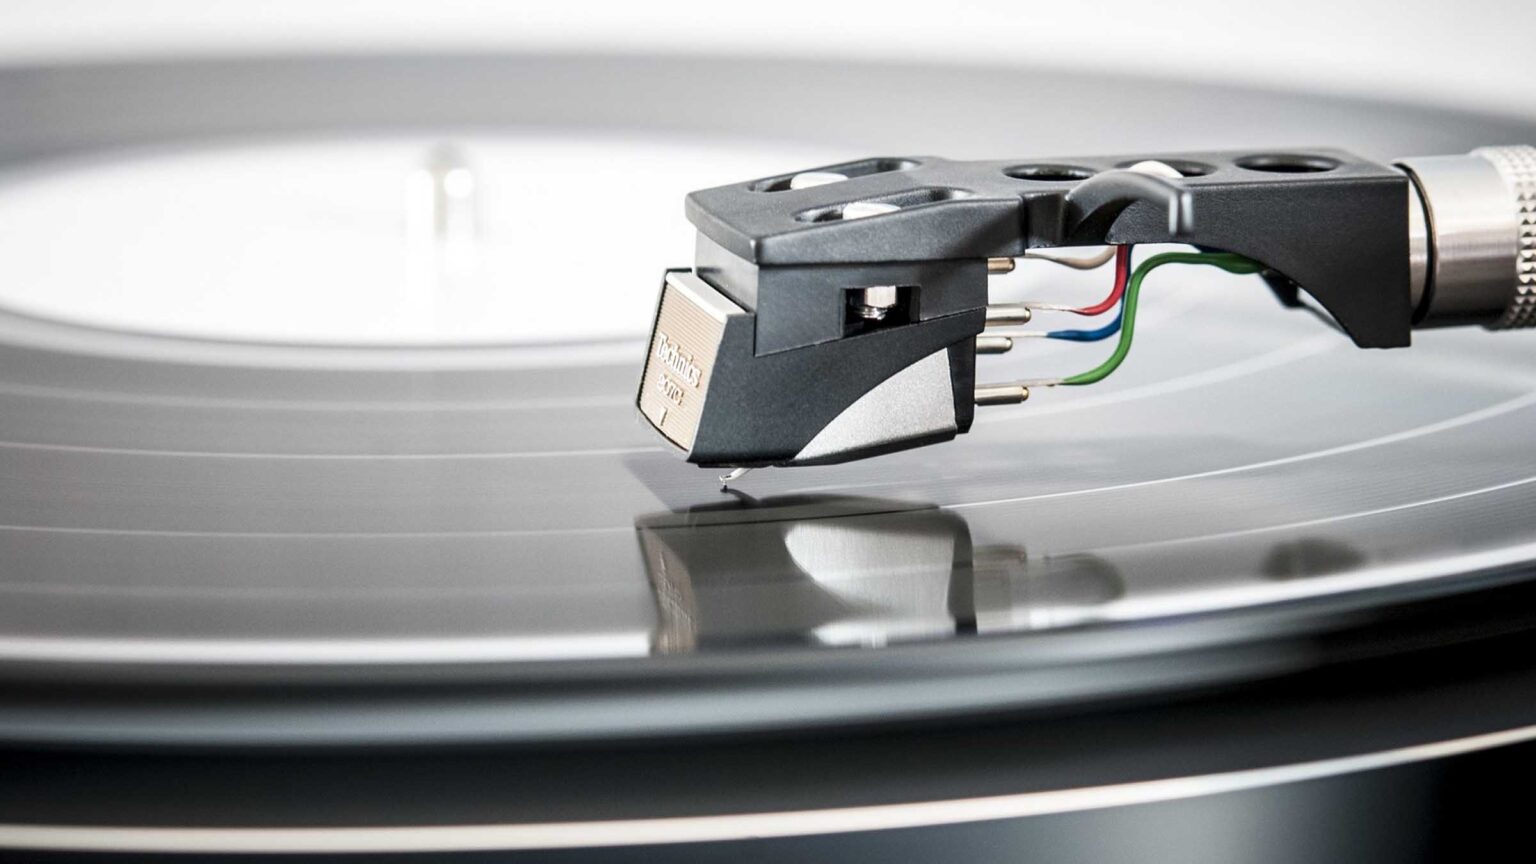 Taking care of your sound system can be a daunting task. Check out our tips for making sure that your turntable setup delivers the best sound possible.